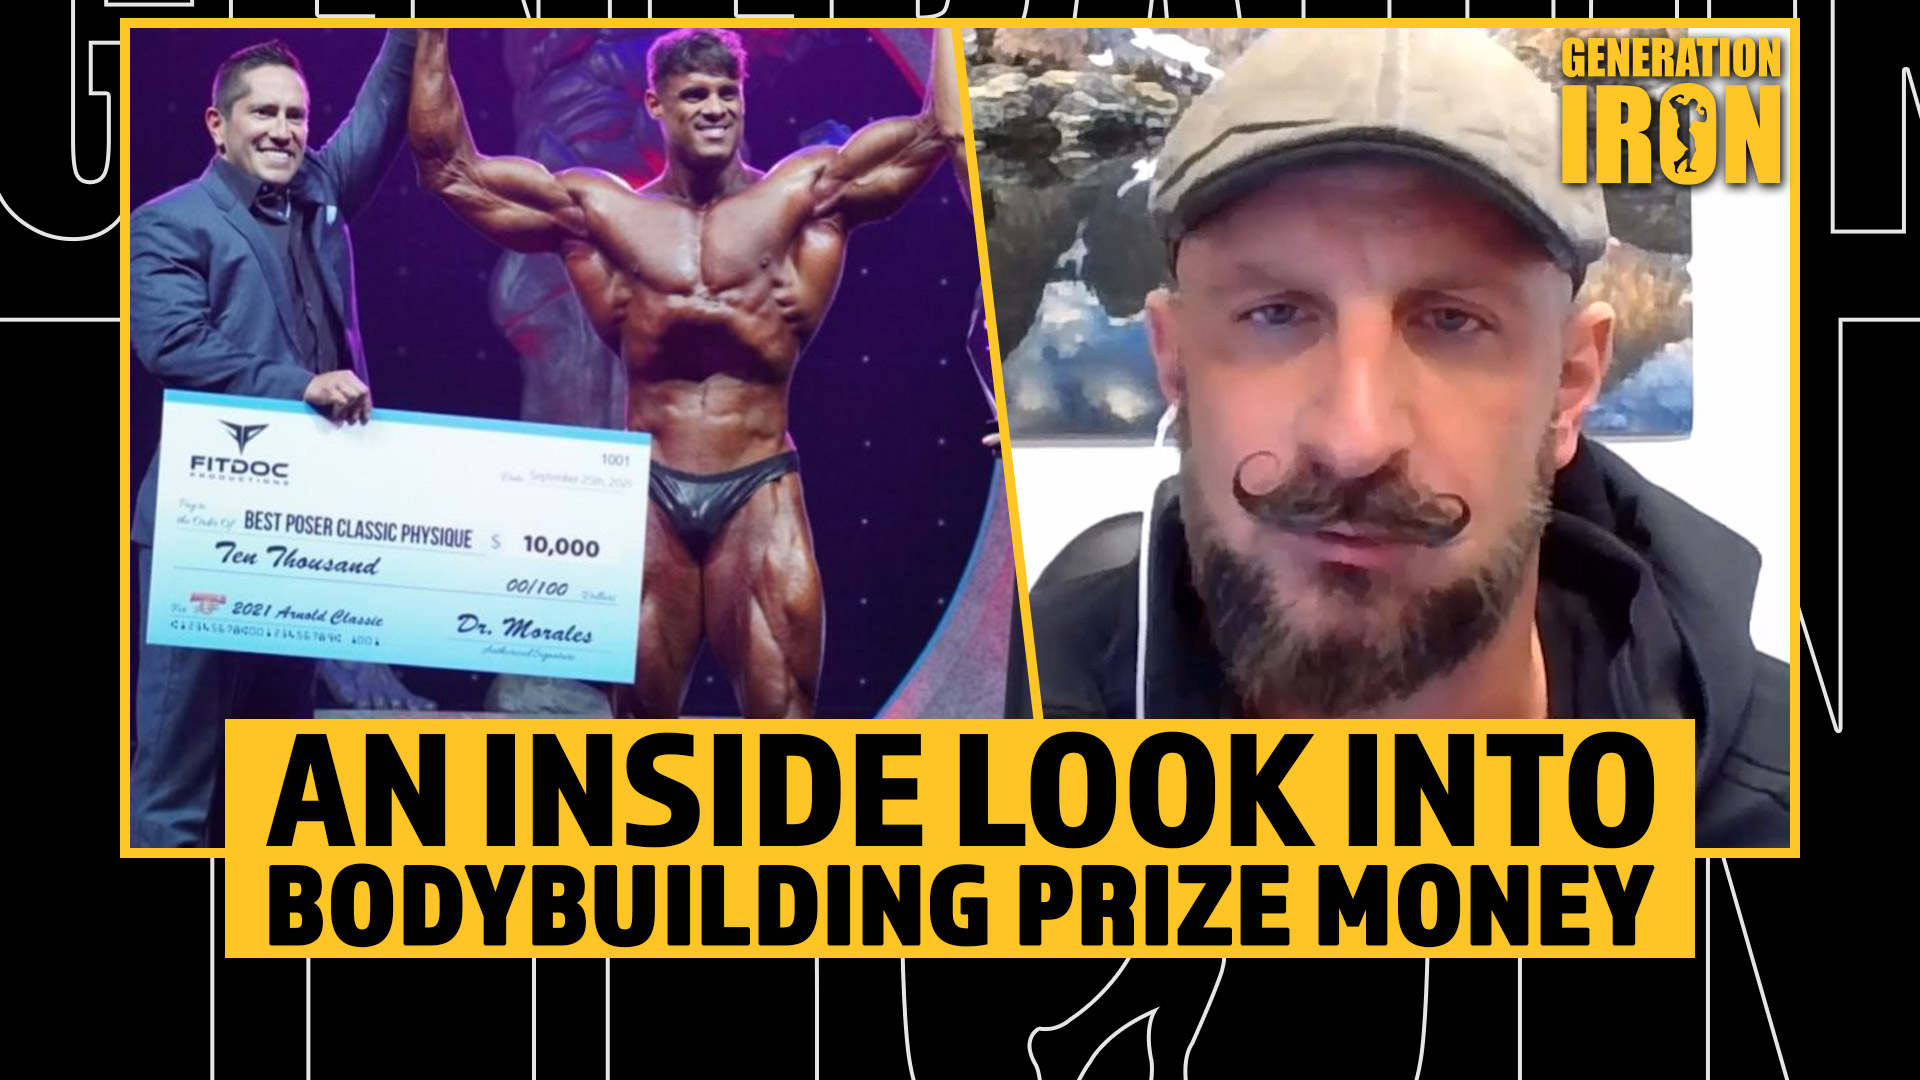 Bodybuilding Promoter Chris Minnes: How Prize Money Is Determined… And How It Can Be Raised